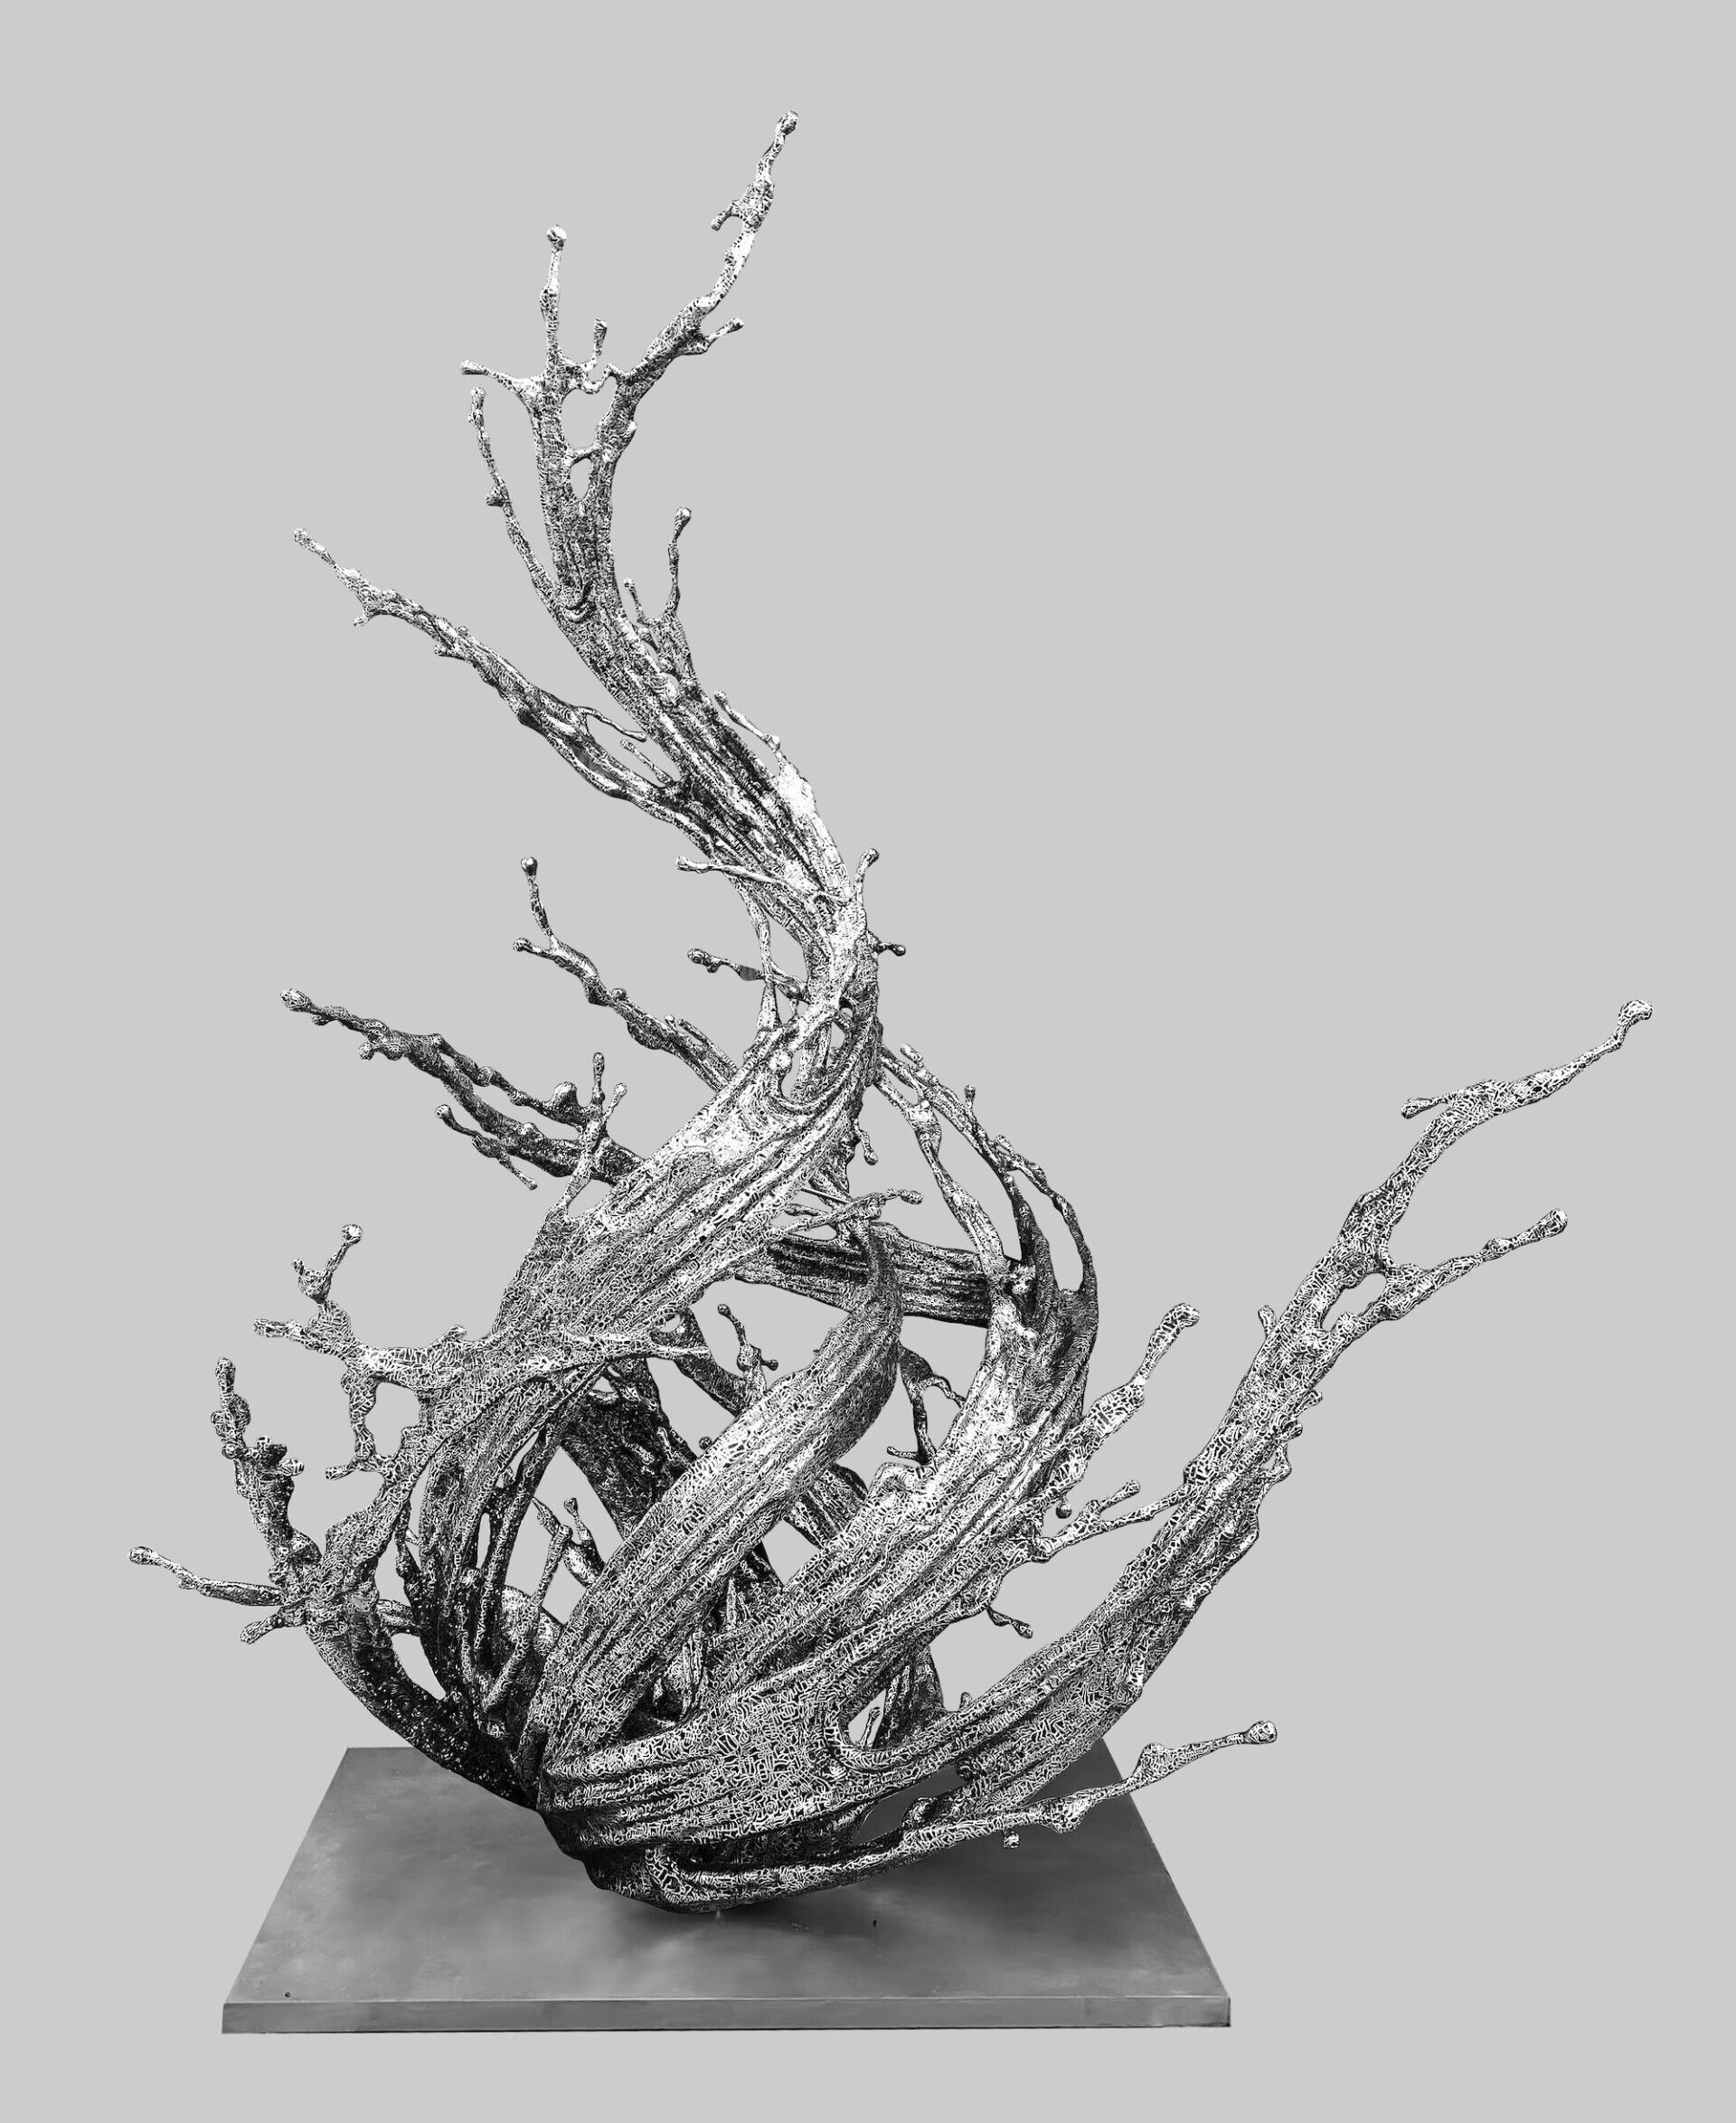 Intricate Sculptures by Zheng Lu Suspend Splashes of Water in Stainless Steel